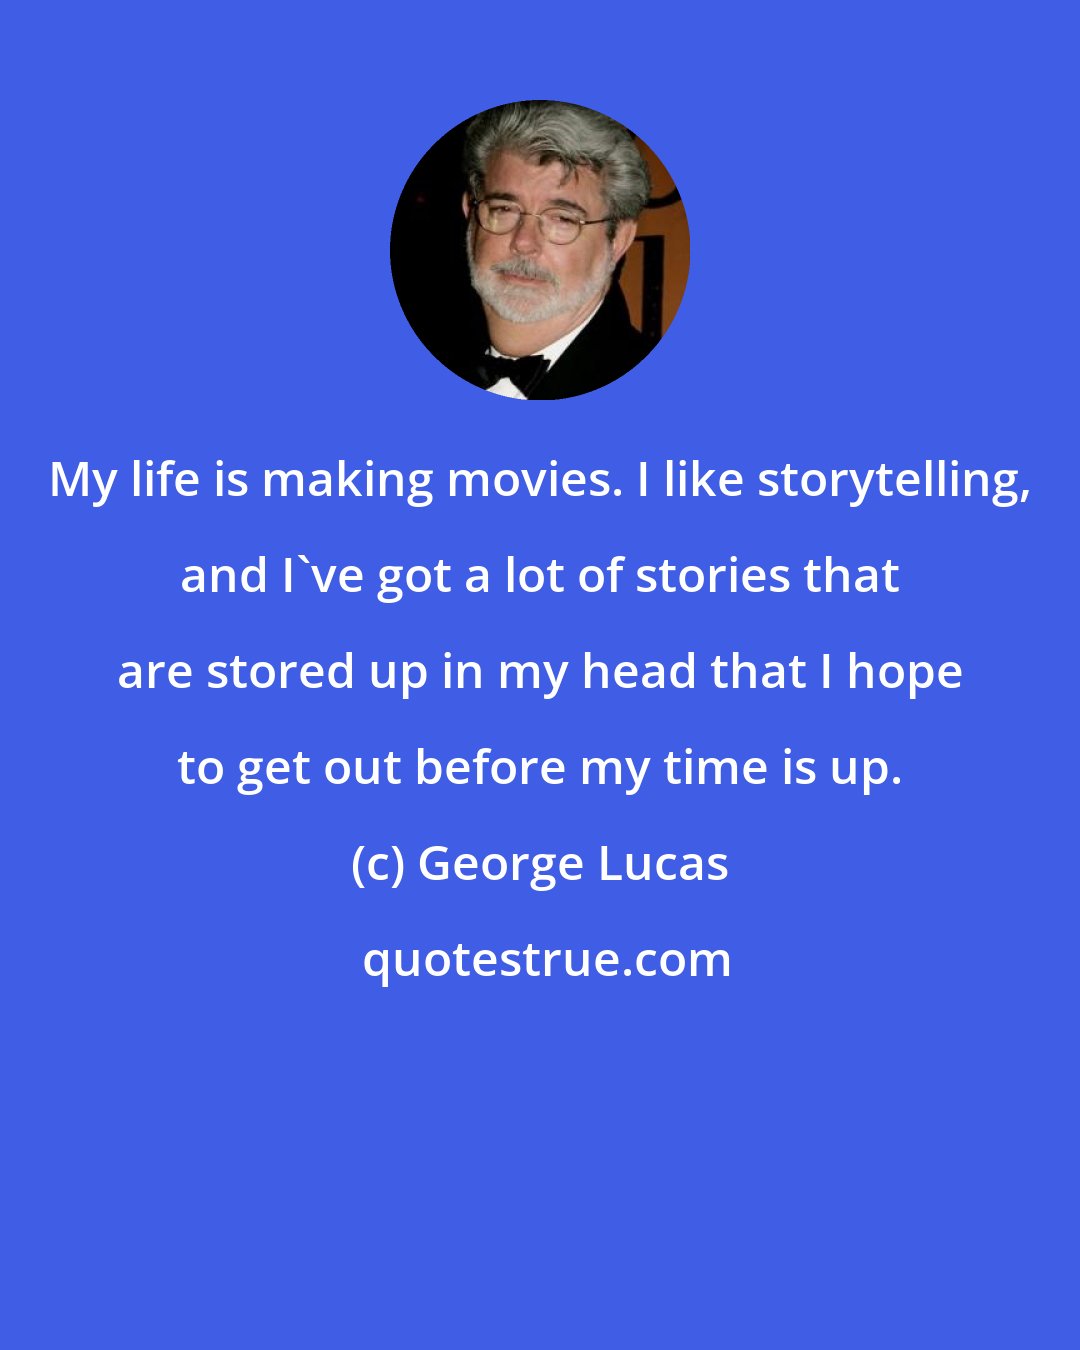 George Lucas: My life is making movies. I like storytelling, and I've got a lot of stories that are stored up in my head that I hope to get out before my time is up.